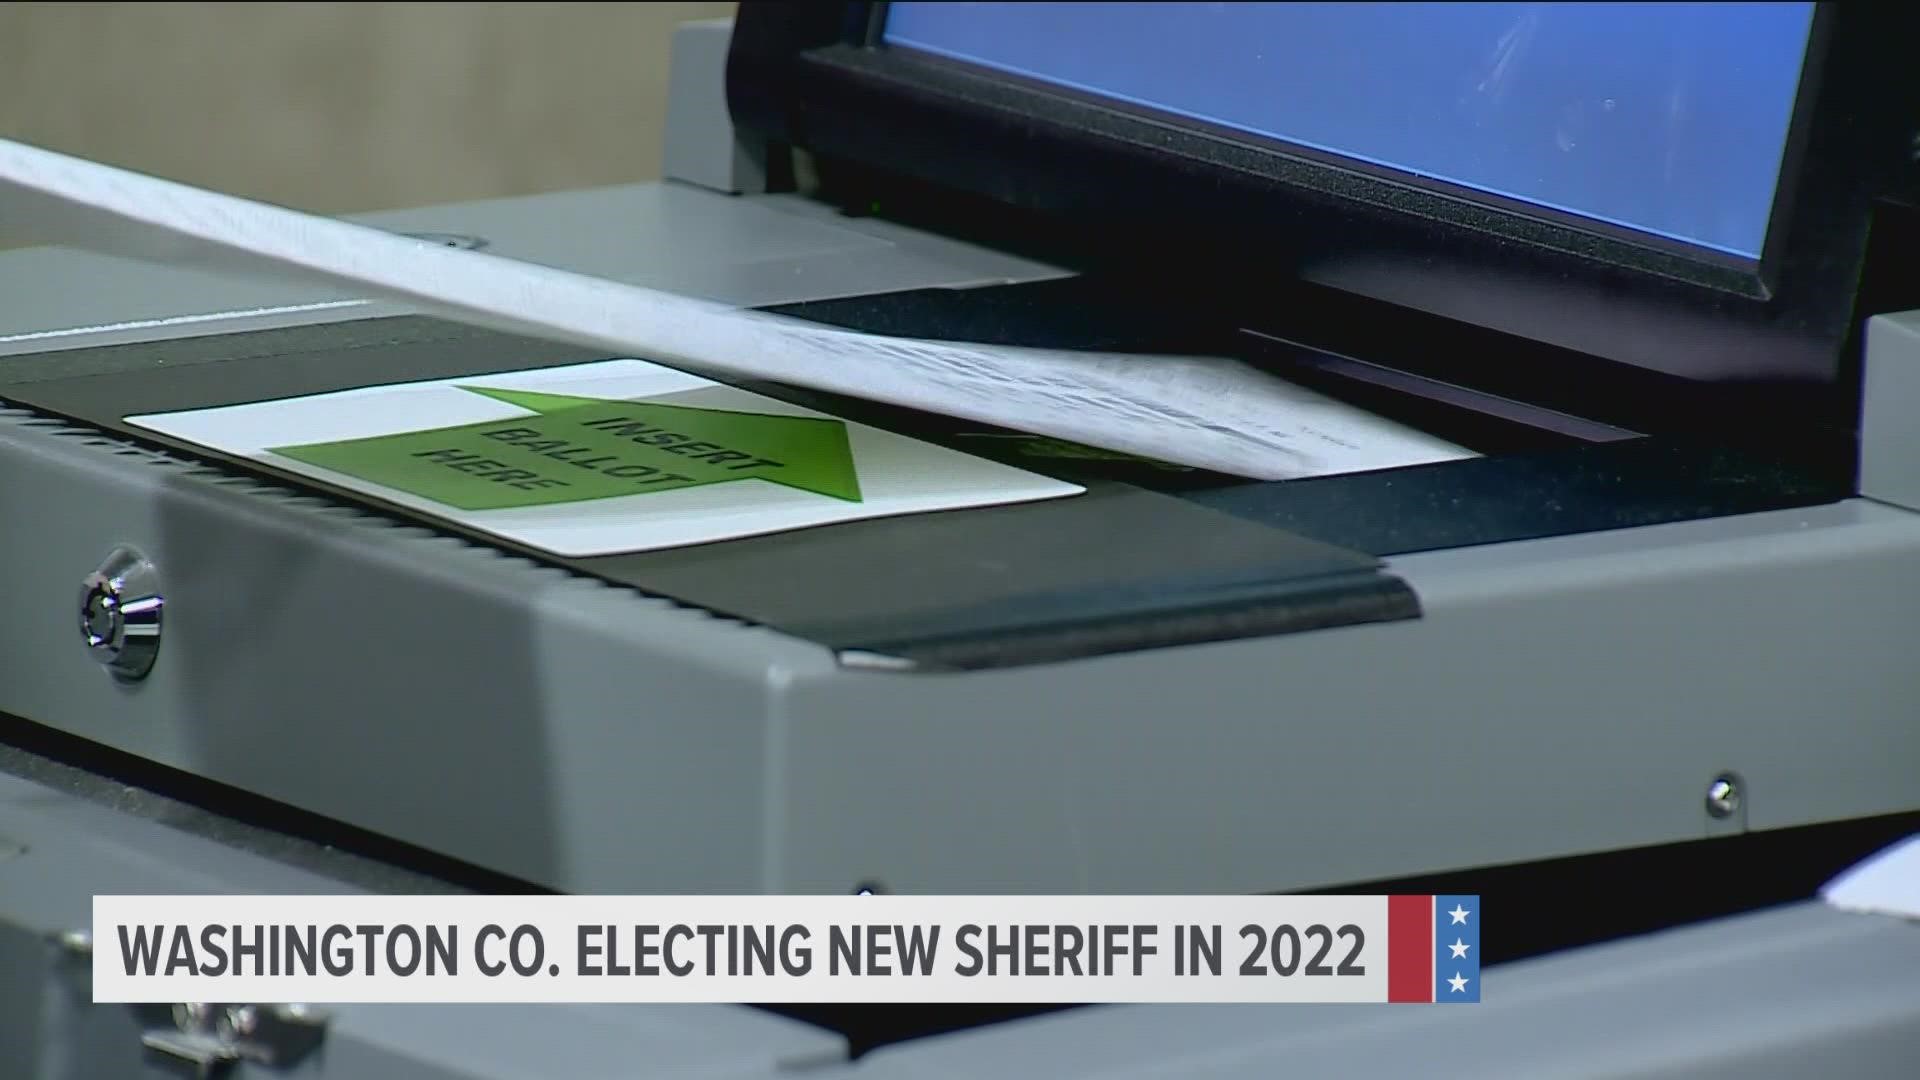 Voters in Washington County decided on a new sheriff and judge in Tuesday's primary election.